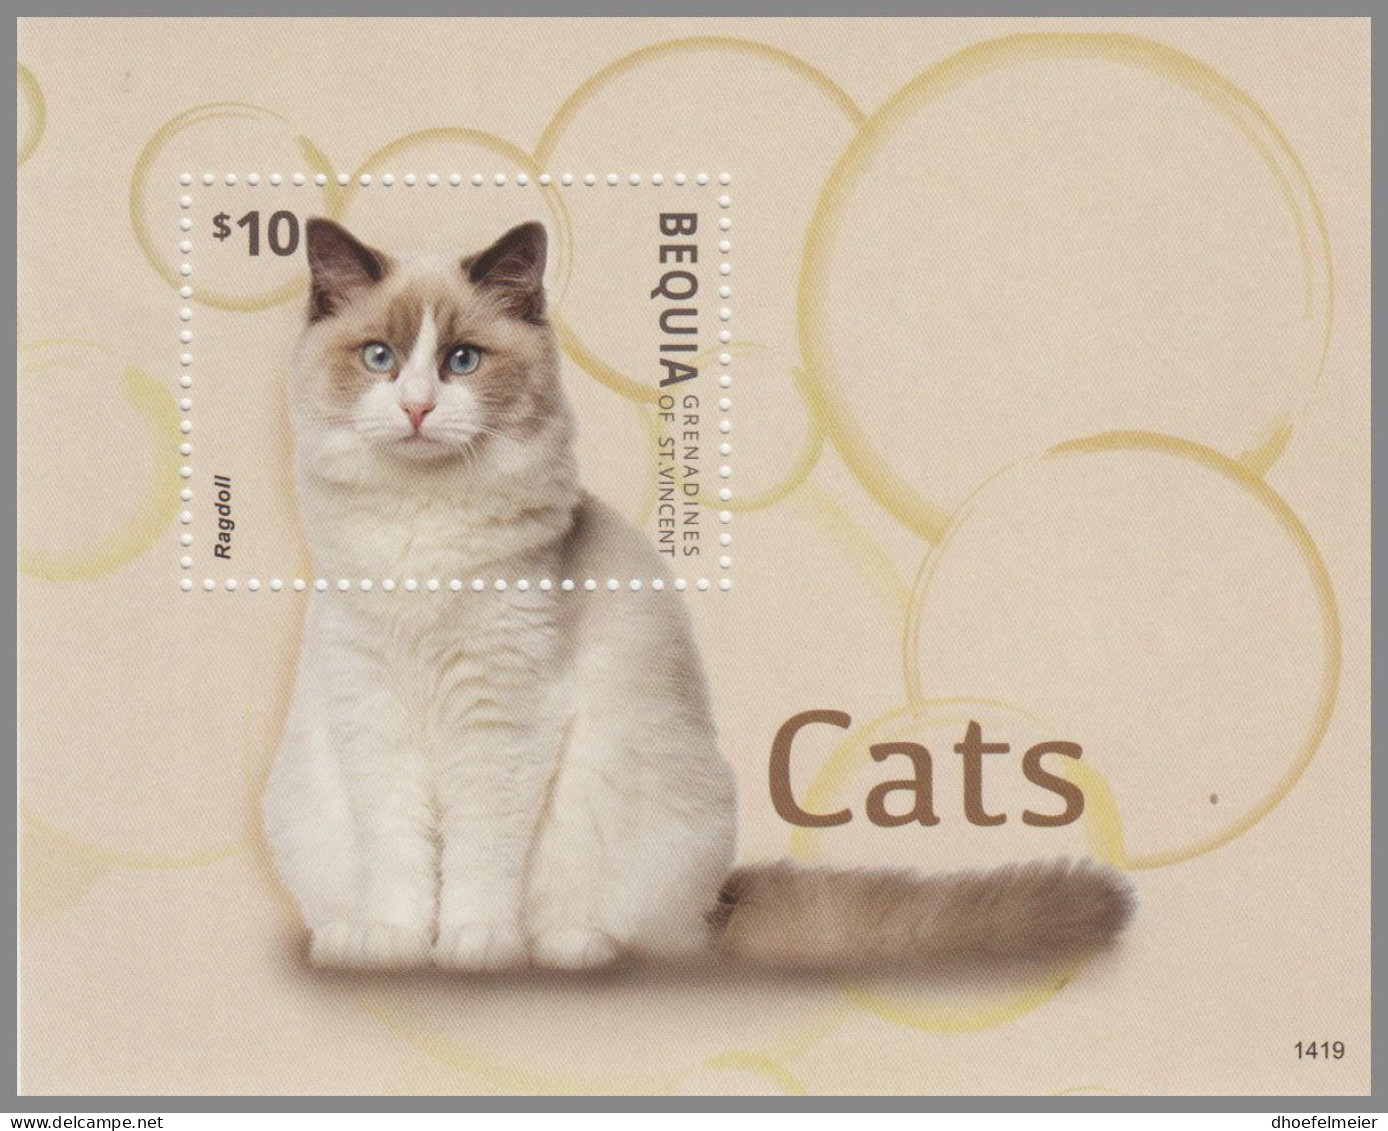 BEQUIA GRENADINES 2014 MNH Cats Katzen 1419 S/S – OFFICIAL ISSUE – DHQ49610 - Chats Domestiques